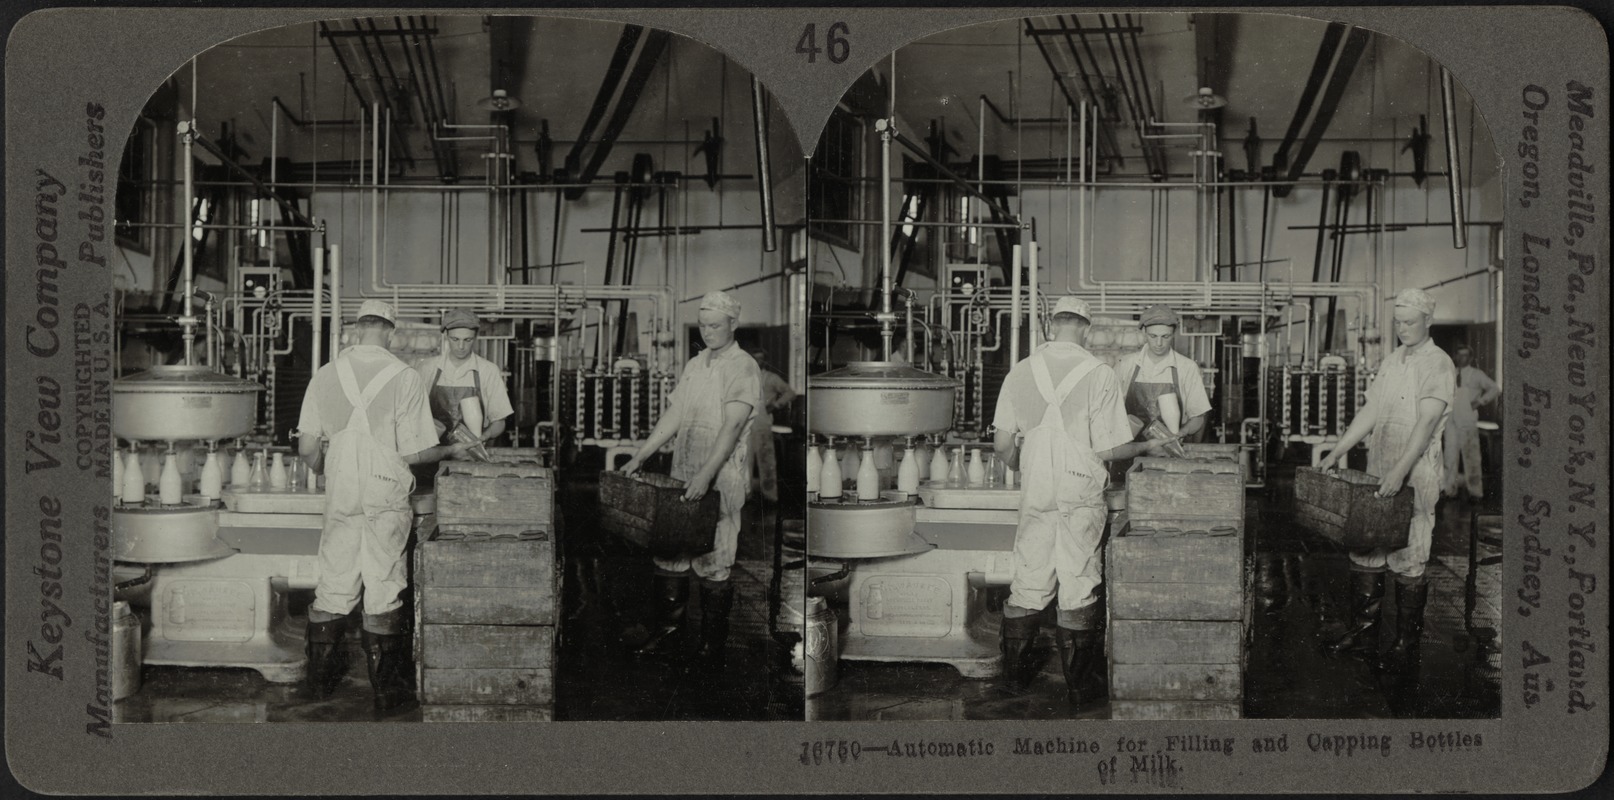 Automatic machine for filling and capping bottles of milk, Cohocton, New York